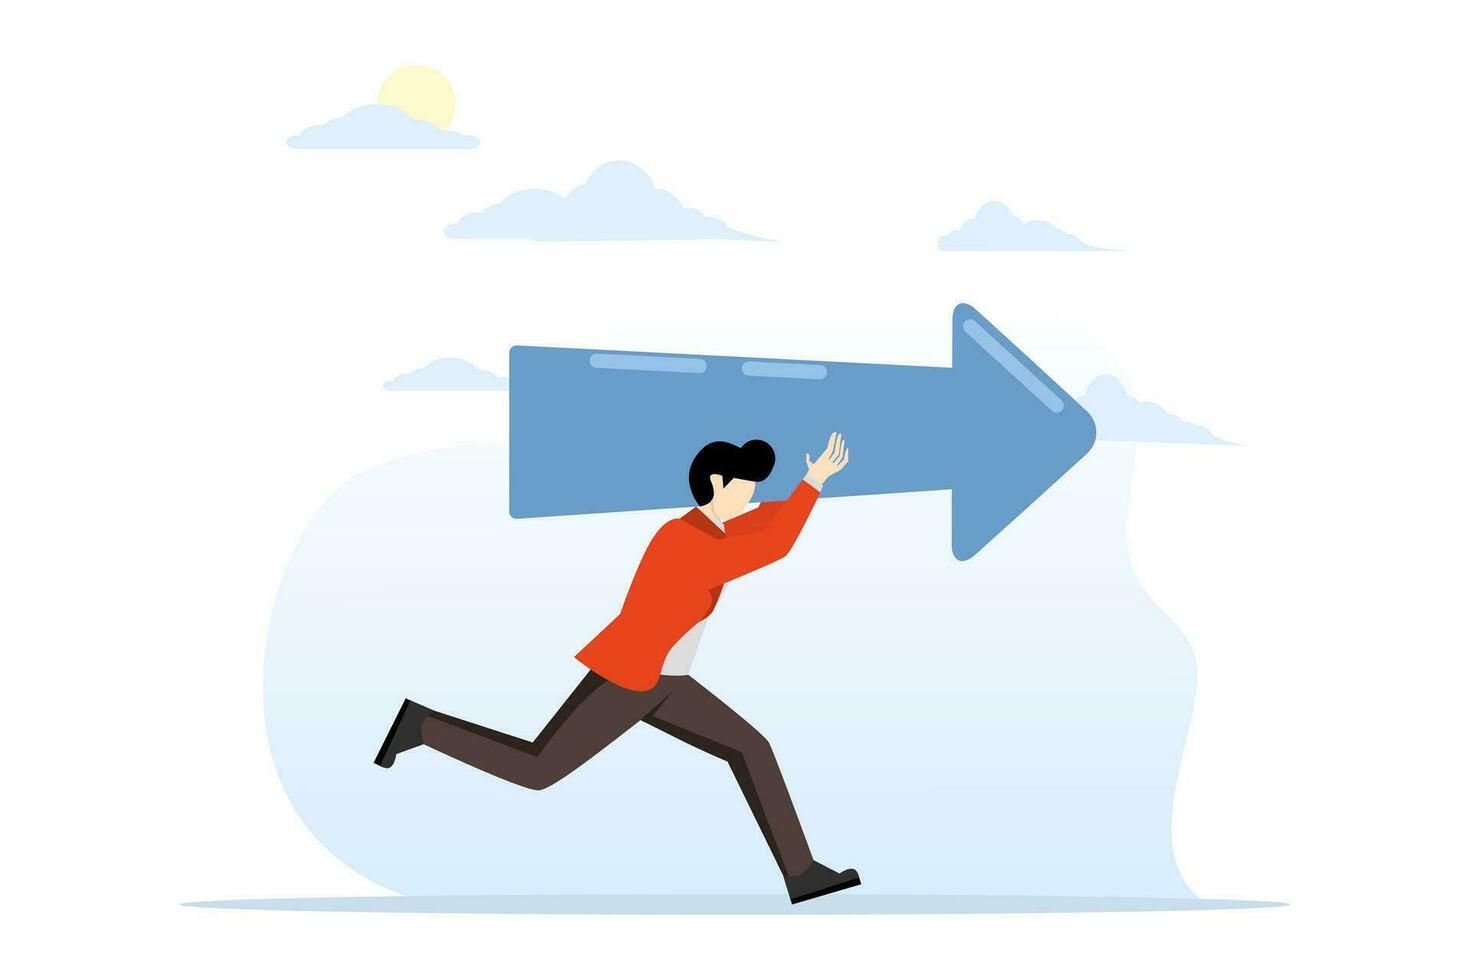 concept of moving forward for a successful future, business direction, determination or courage, career path or road to success, opportunity, confident businessman walking with arrow direction. vector